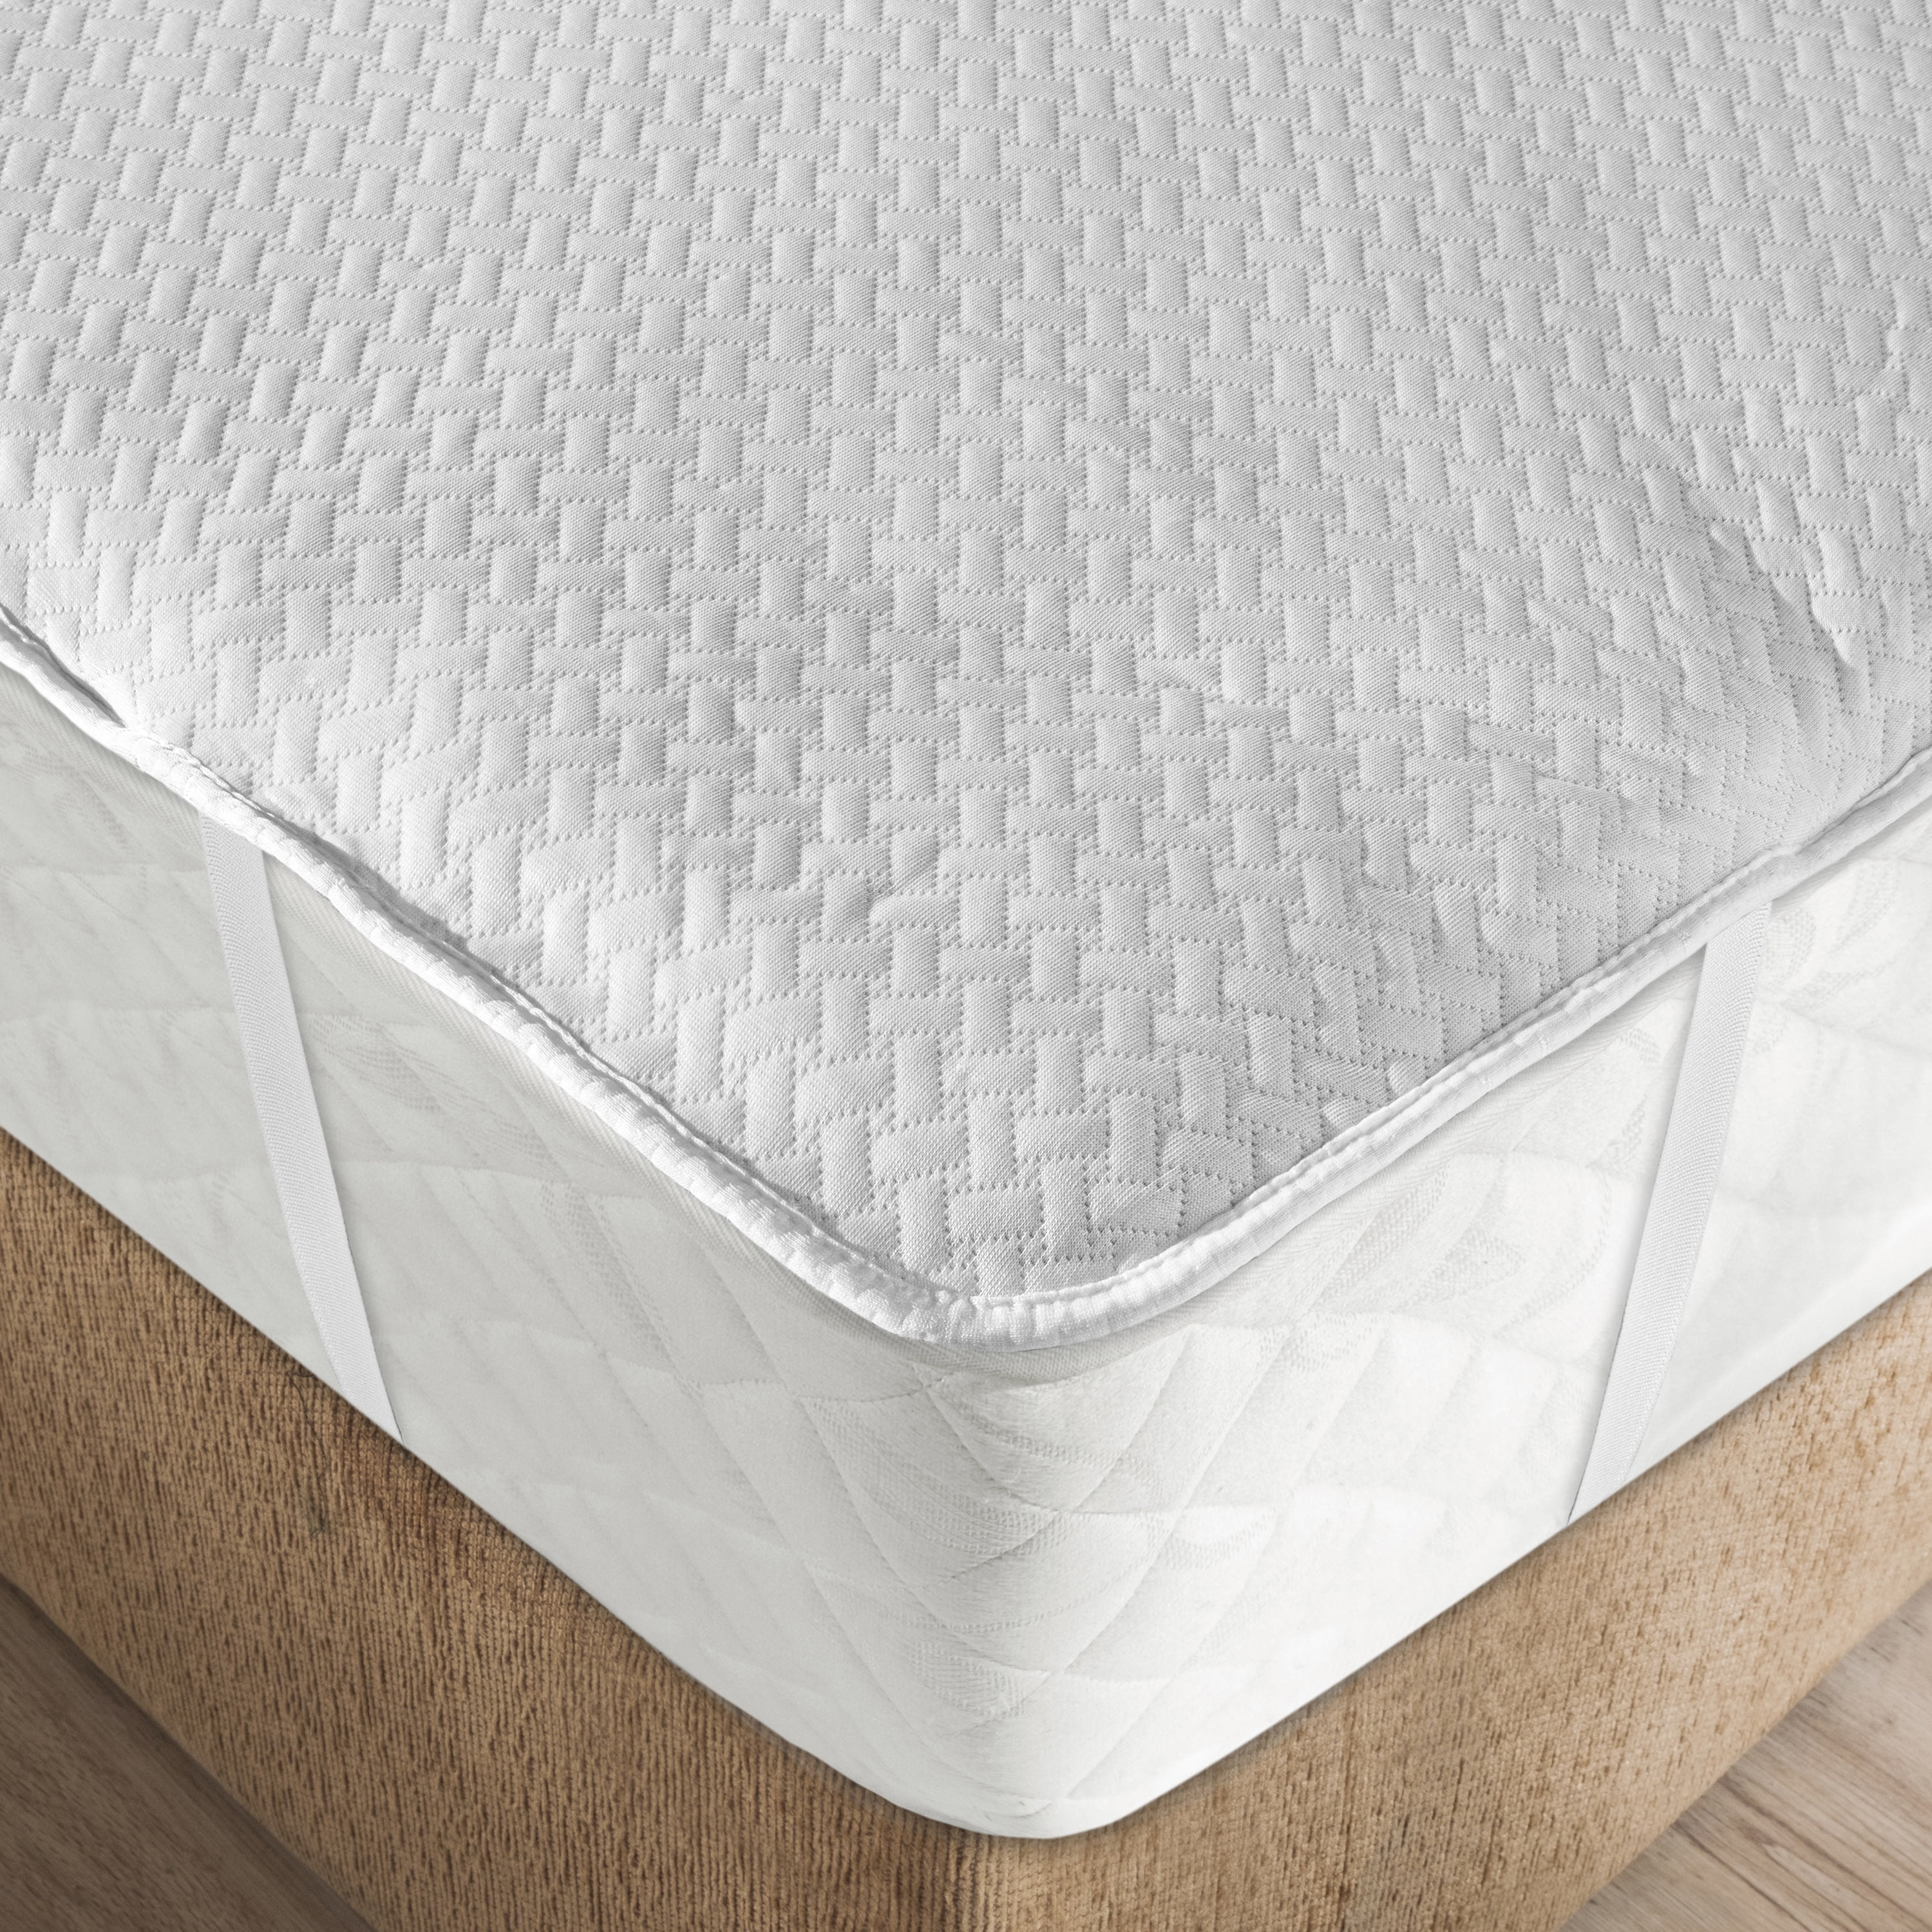 8" Double Quilted Mattress Cover/Protector Fully Zipped Encasement 